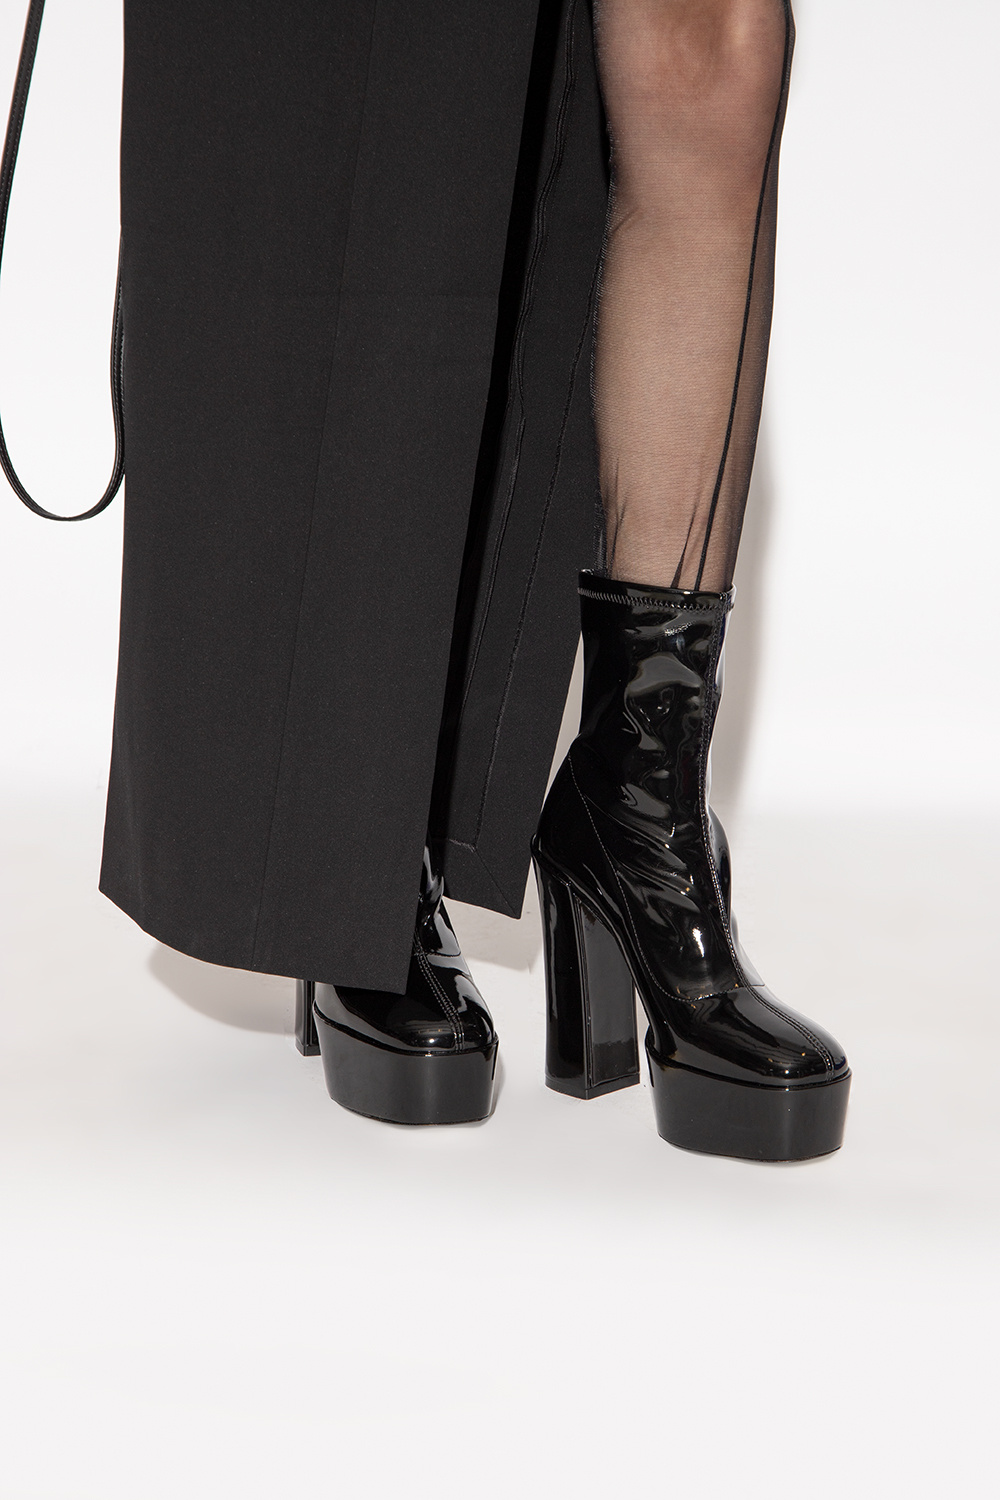 Skyhigh patent-leather platform ankle boots